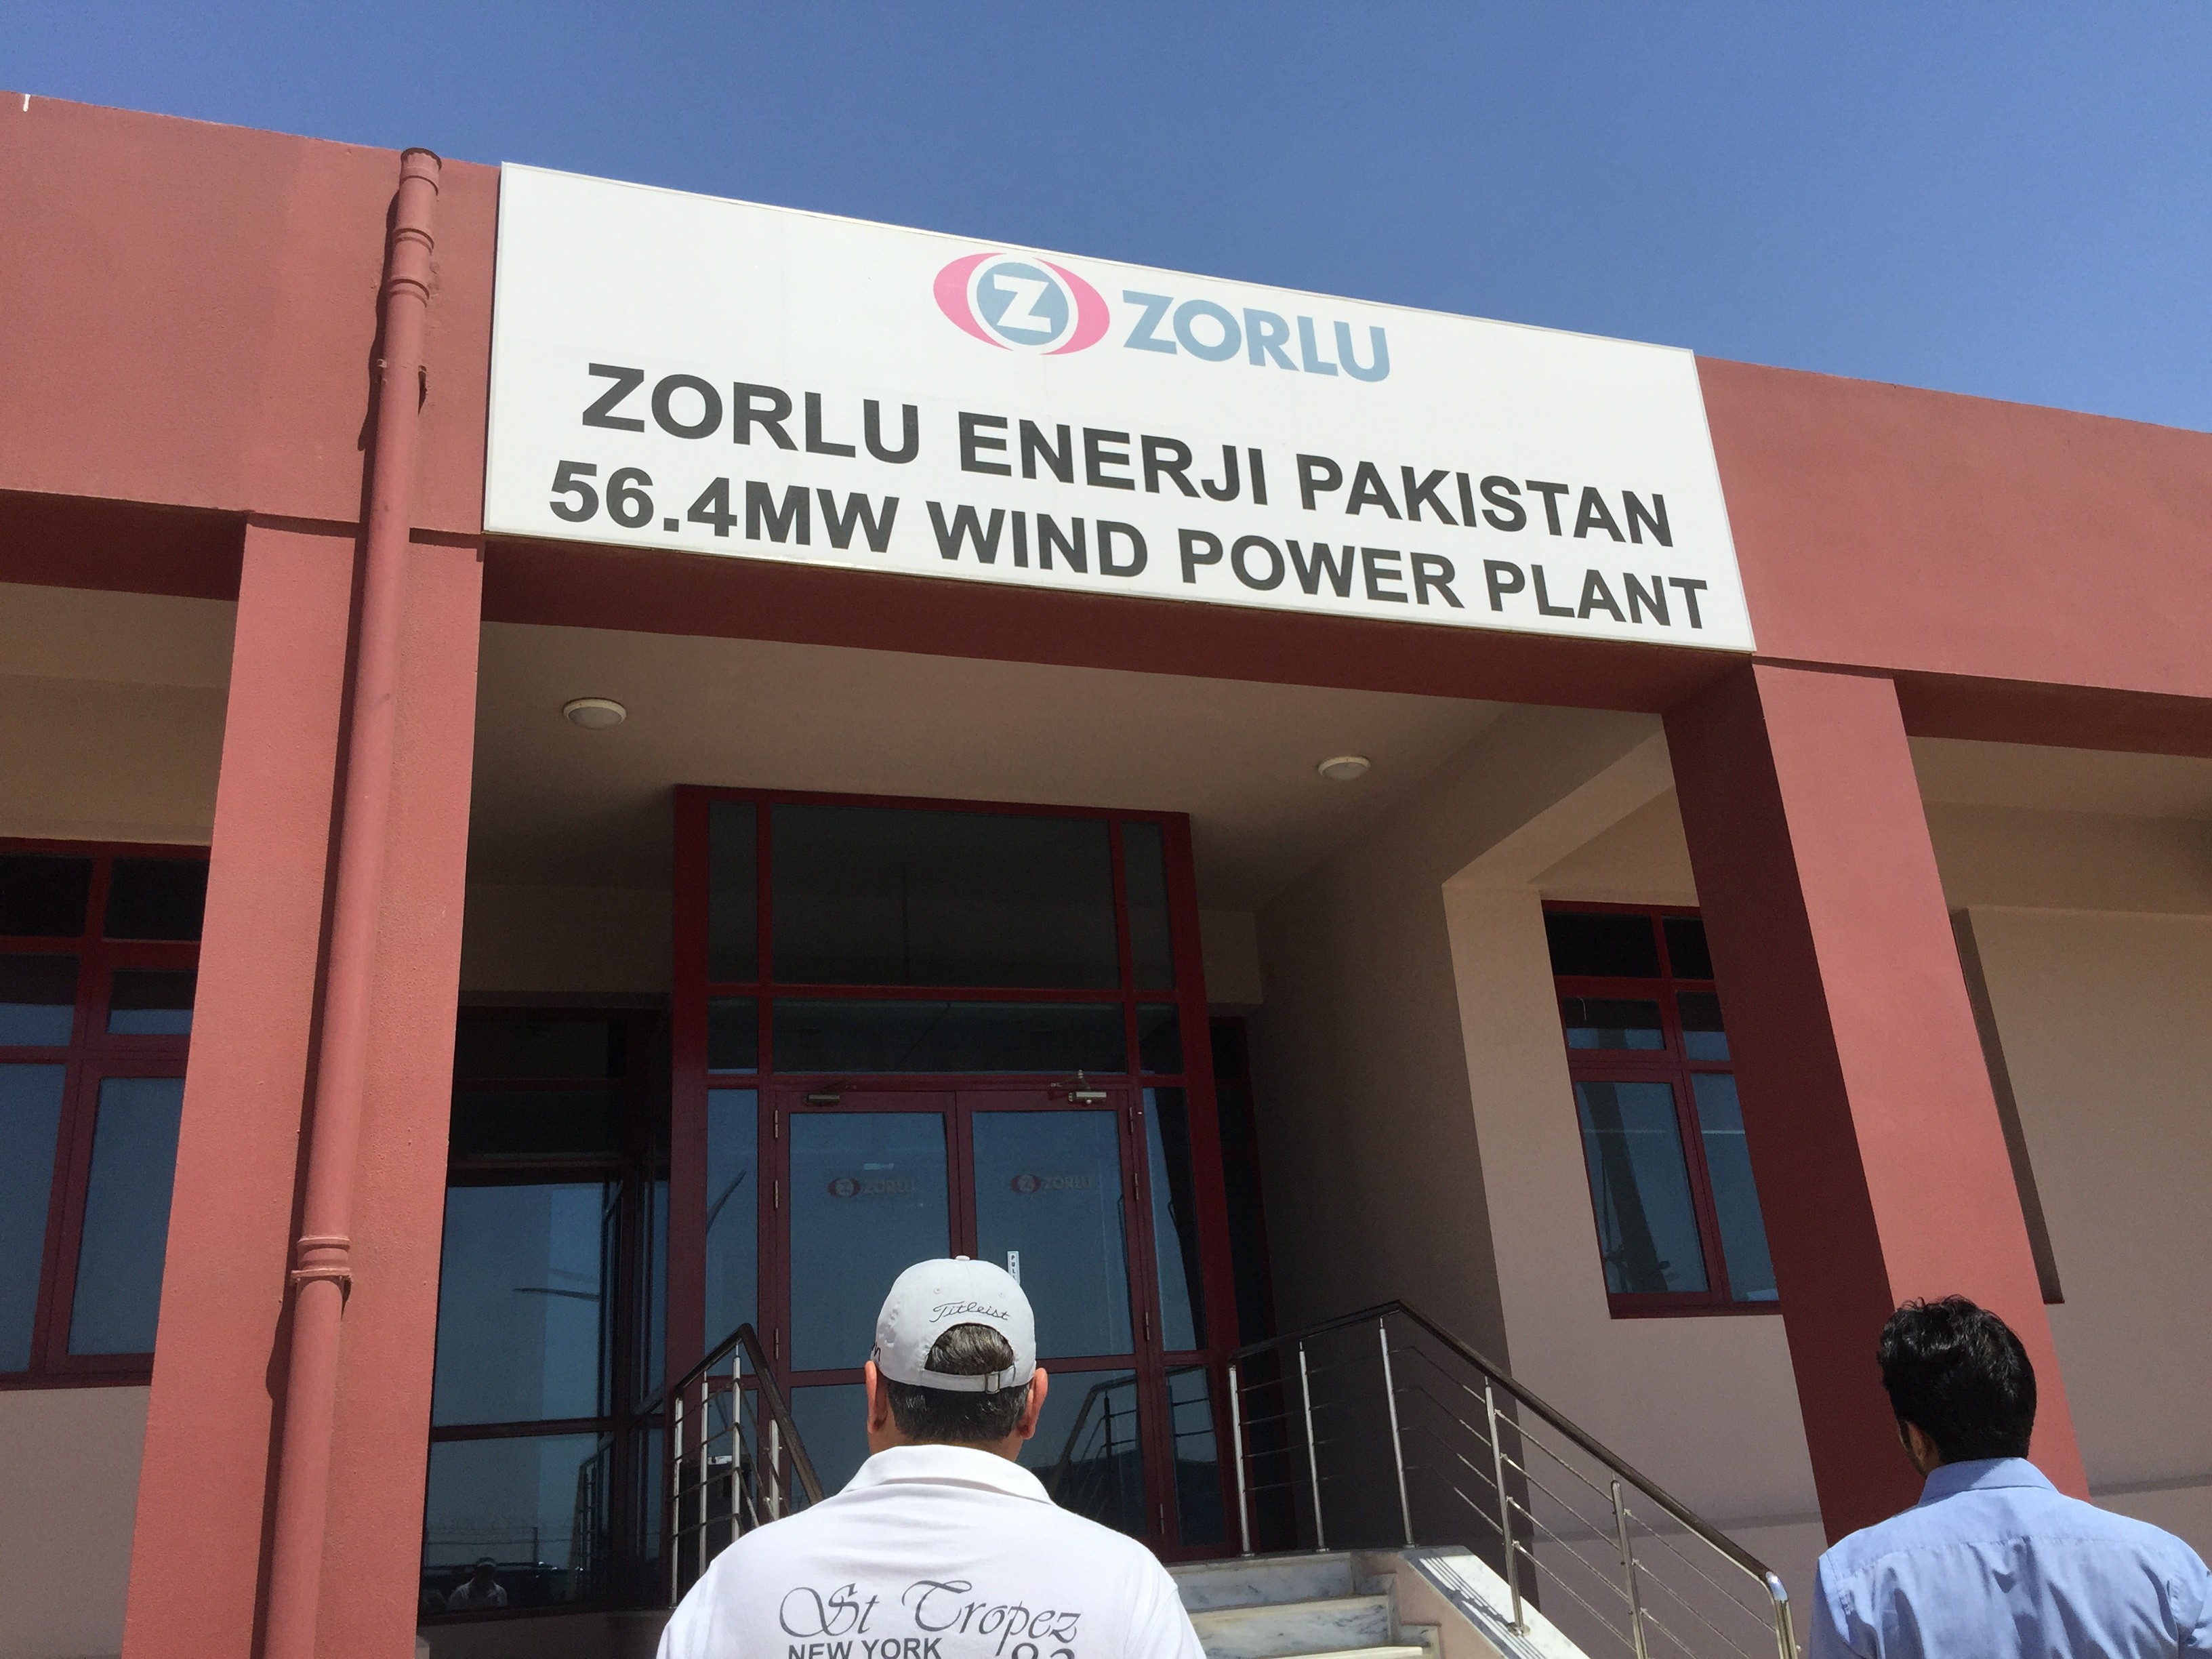 UPM supports Zorlu Wind Energy Project to become first Gold Standard CDM project in Pakistan